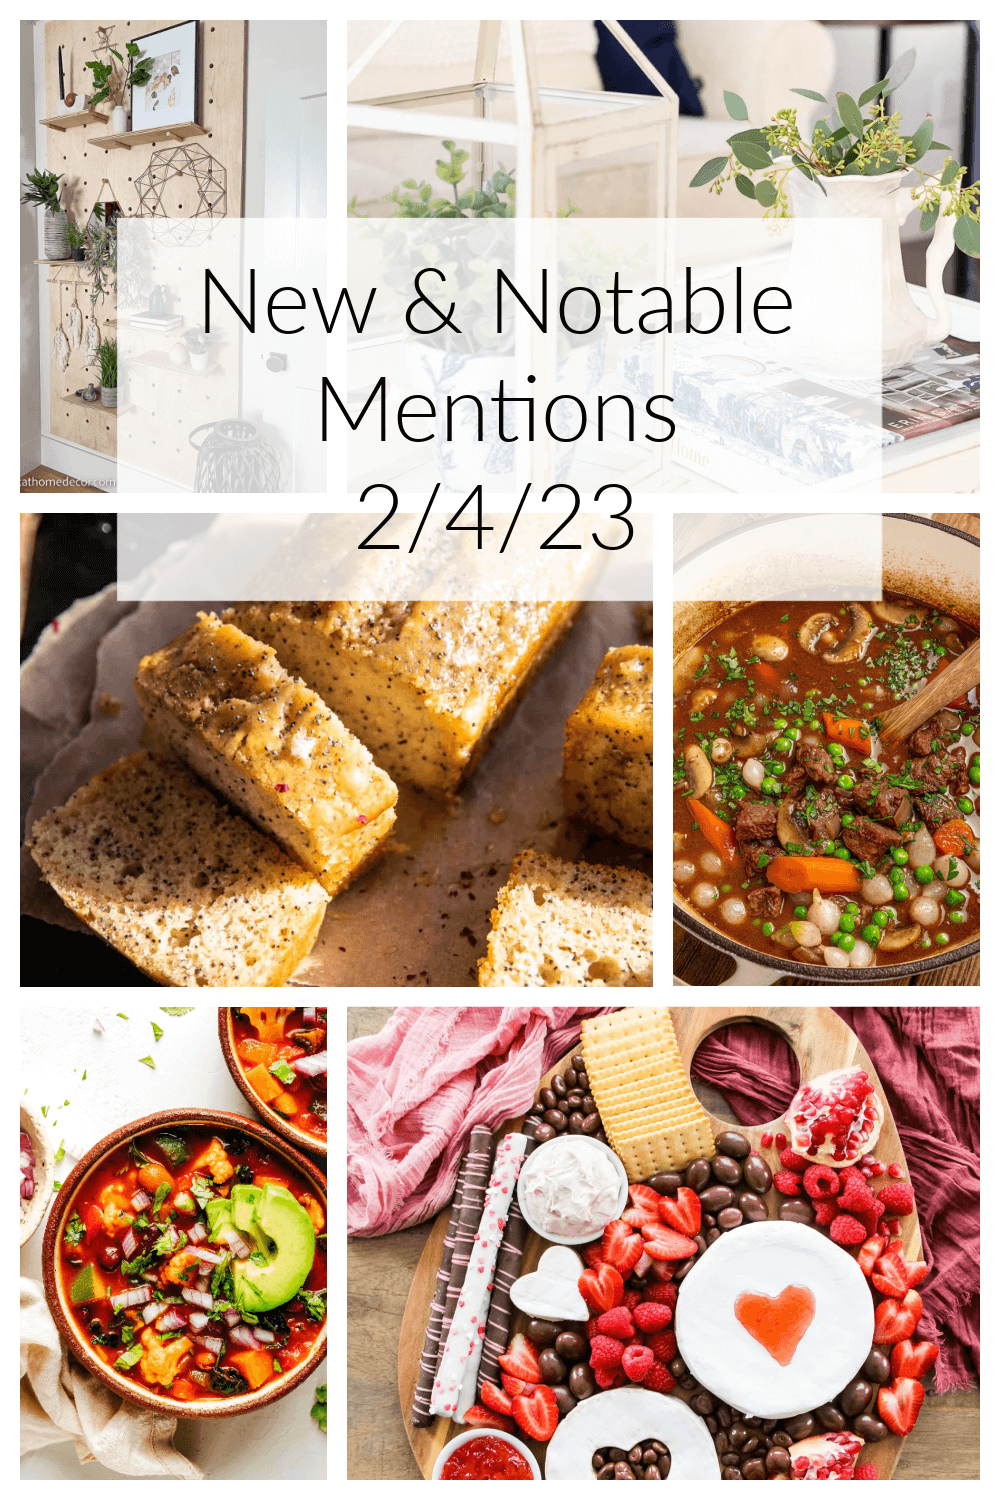 New & Notable Mentions 2/4/23